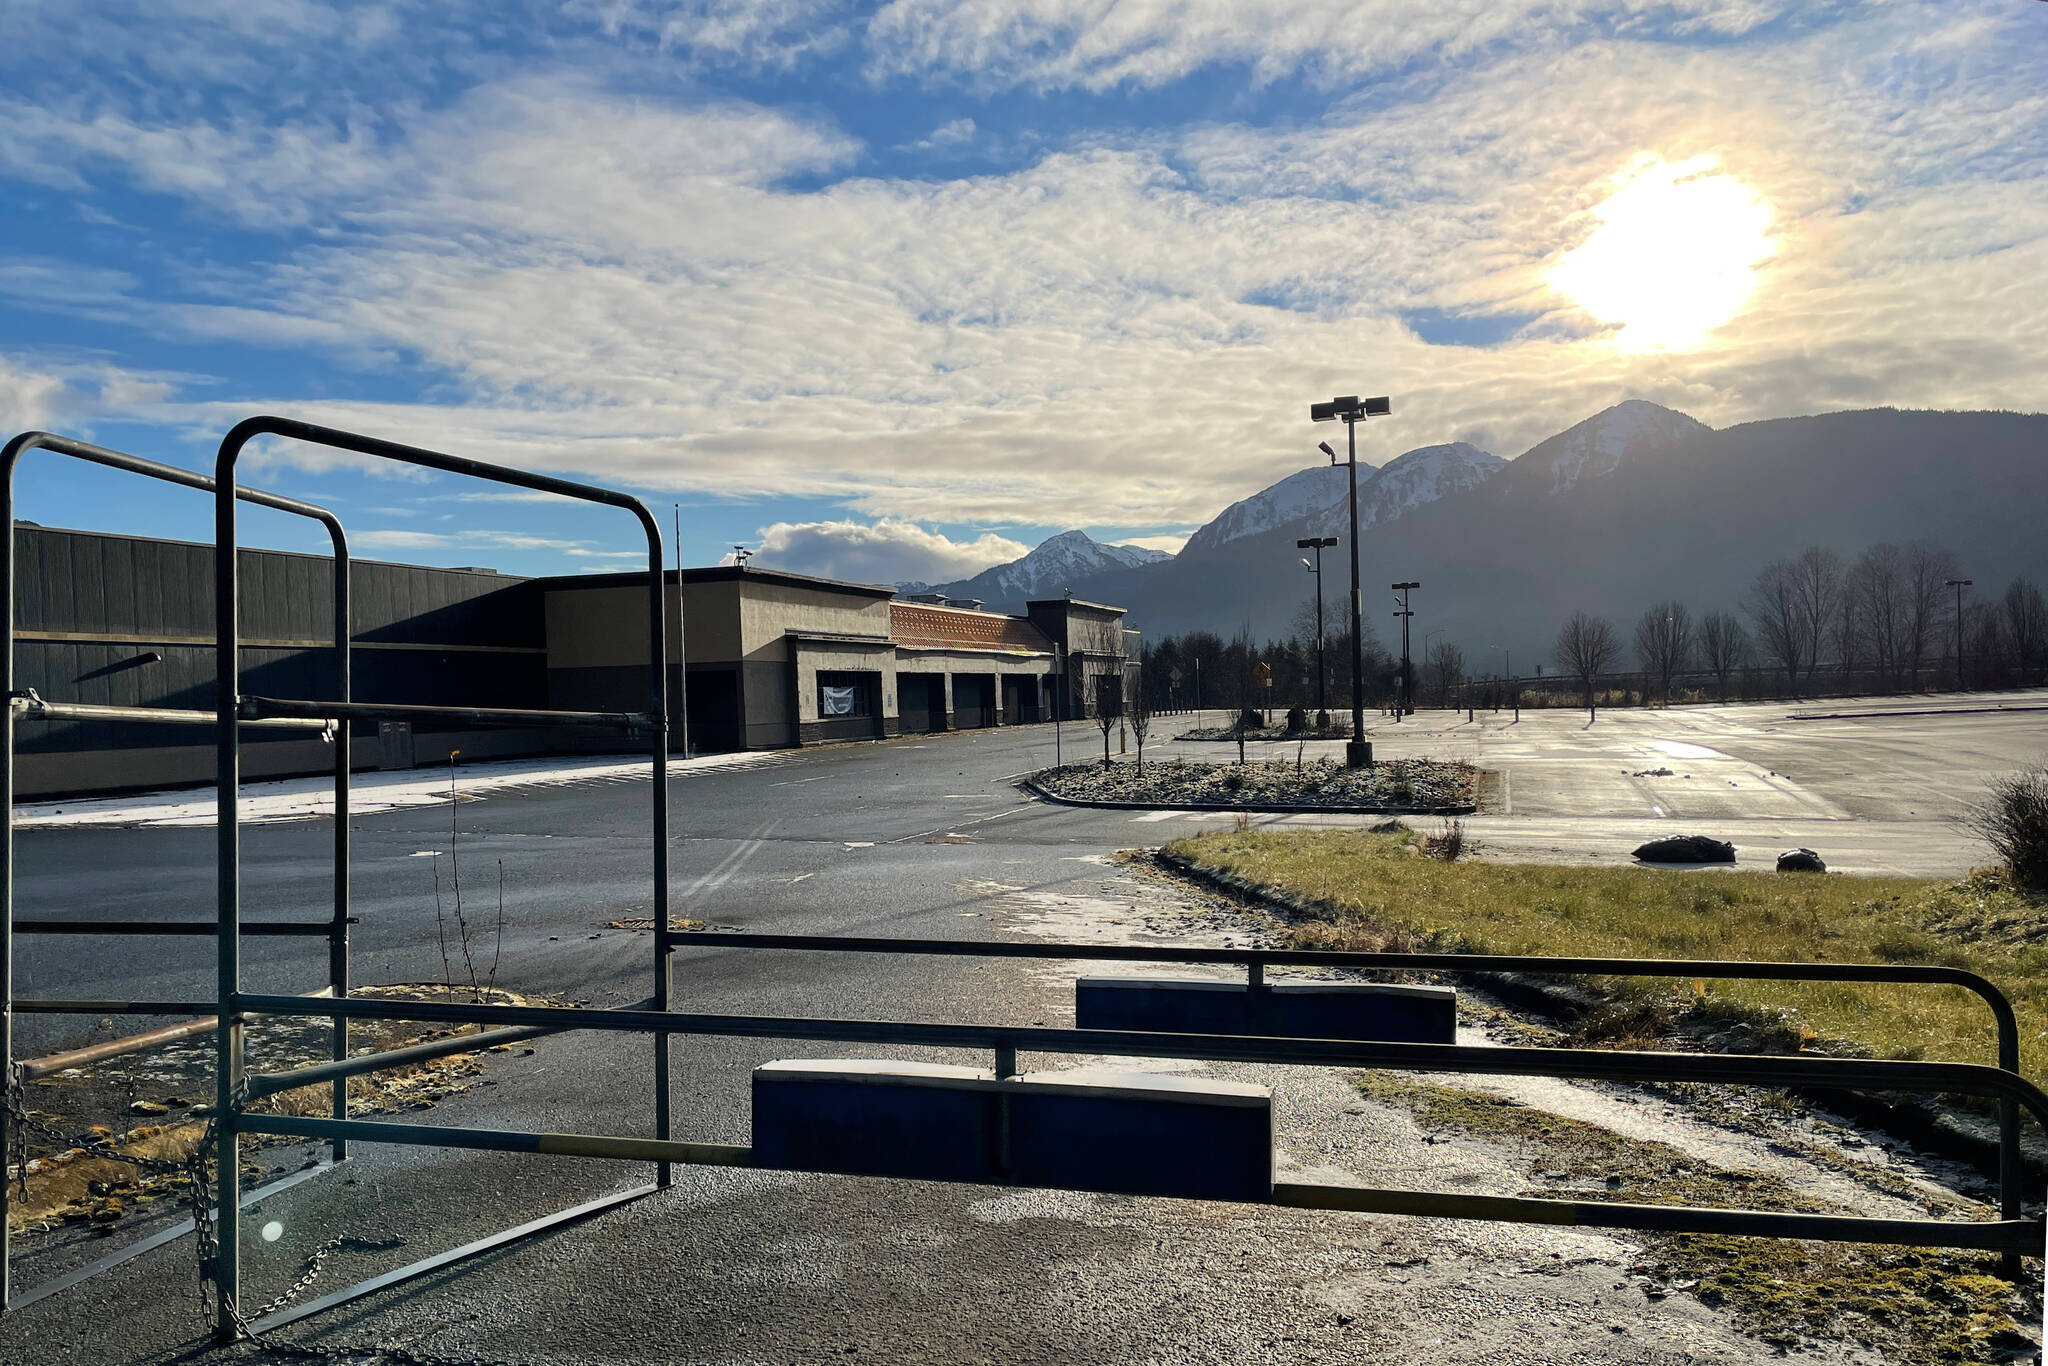 The former Walmart was used as an example for a vacant building that could potentially be assessed for redevelopment via a federal grant that Juneau is applying for. (Michael S. Lockett / Juneau Empire)